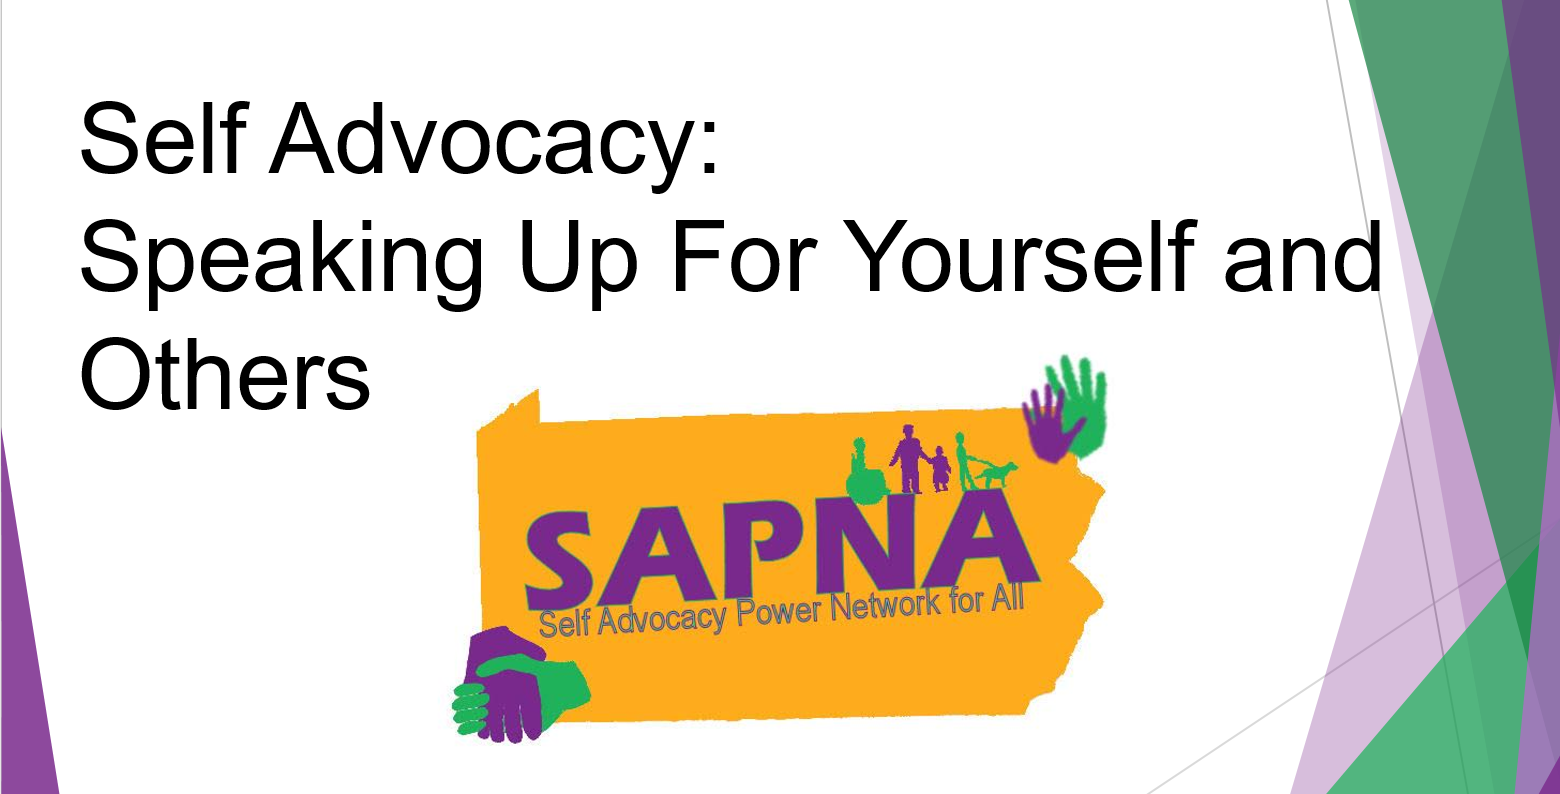 The words self advocacy: speaking up for yourself and others on a white background above the SAPNA Logo